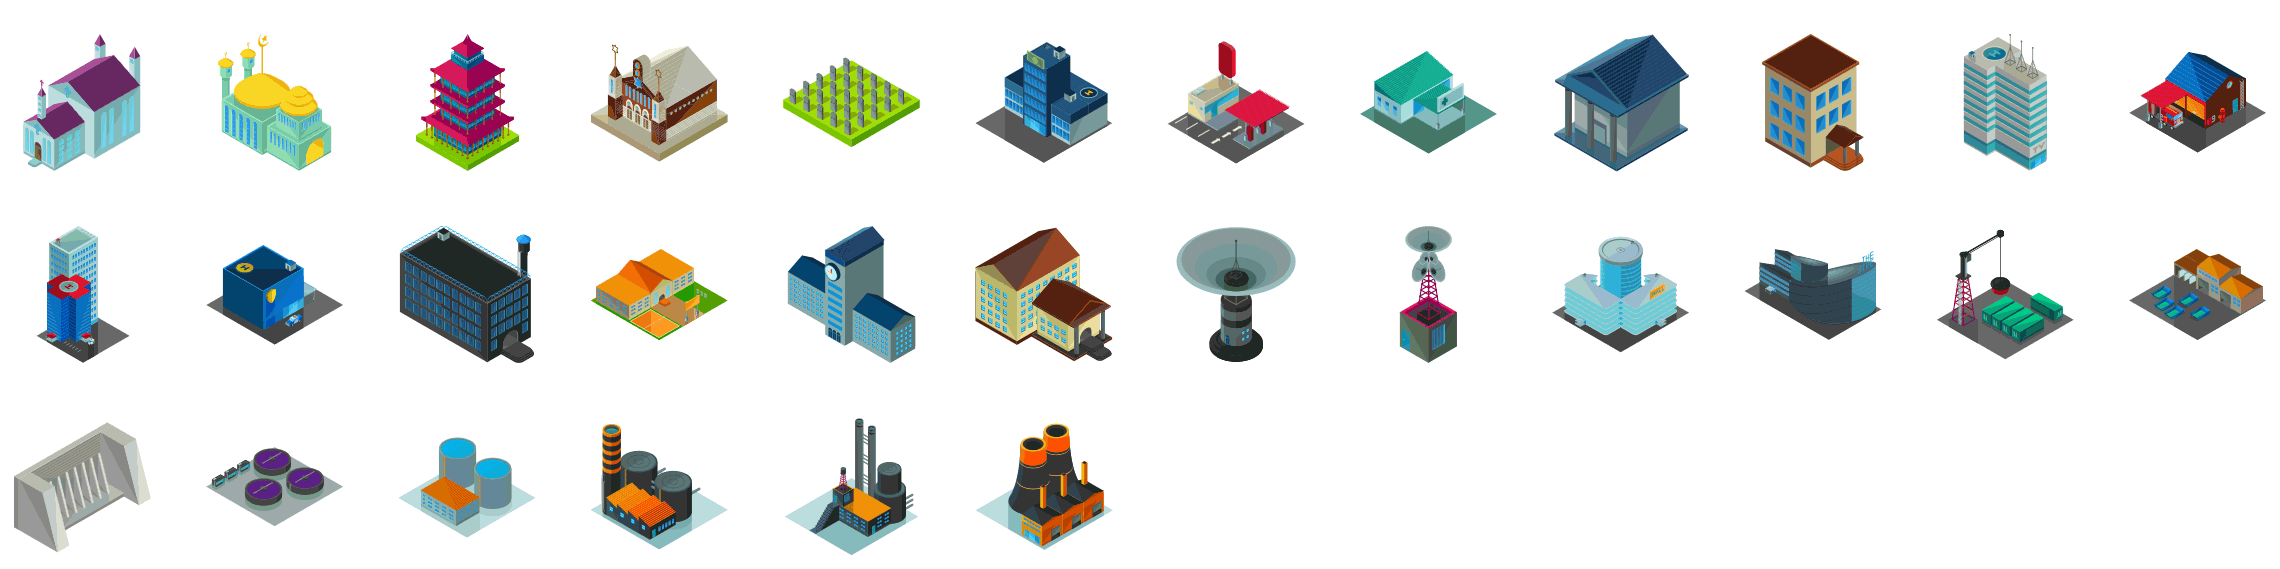 essential-buildings-isometric-icons-preview